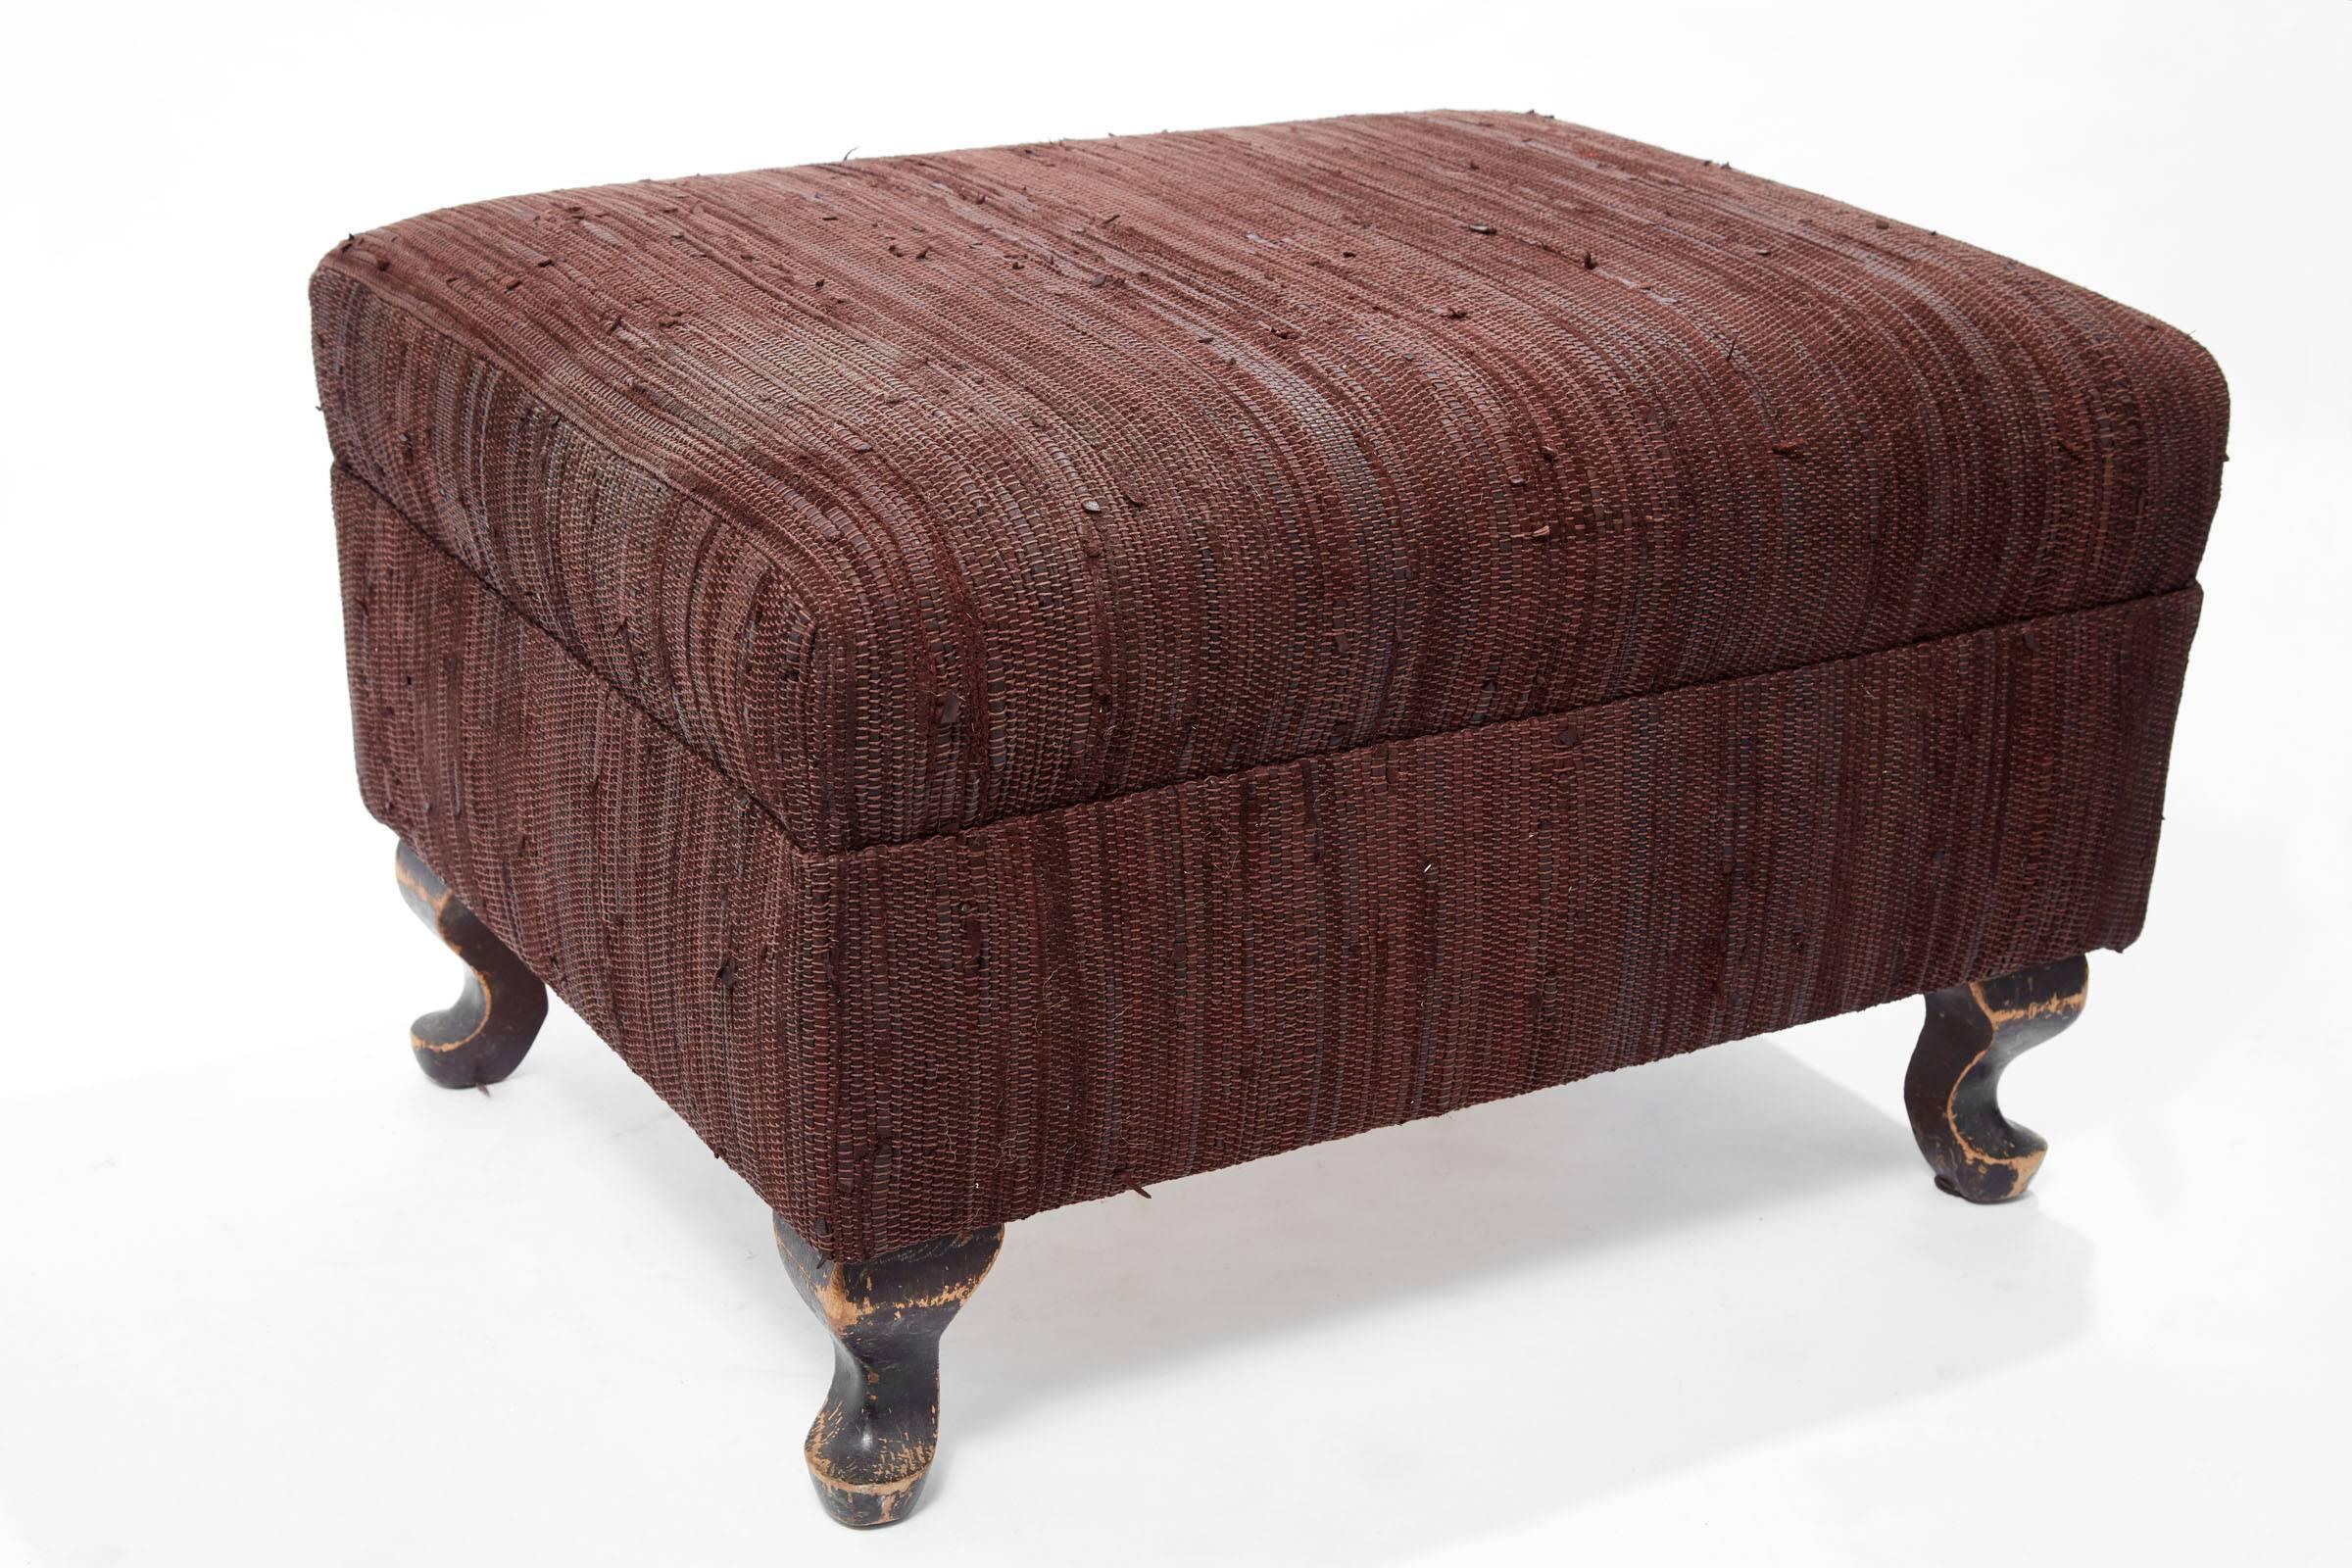 21st century woven leather ottoman on 19th century wooden legs
We used the legs to create a modern version of a footstool using leather woven fabric.